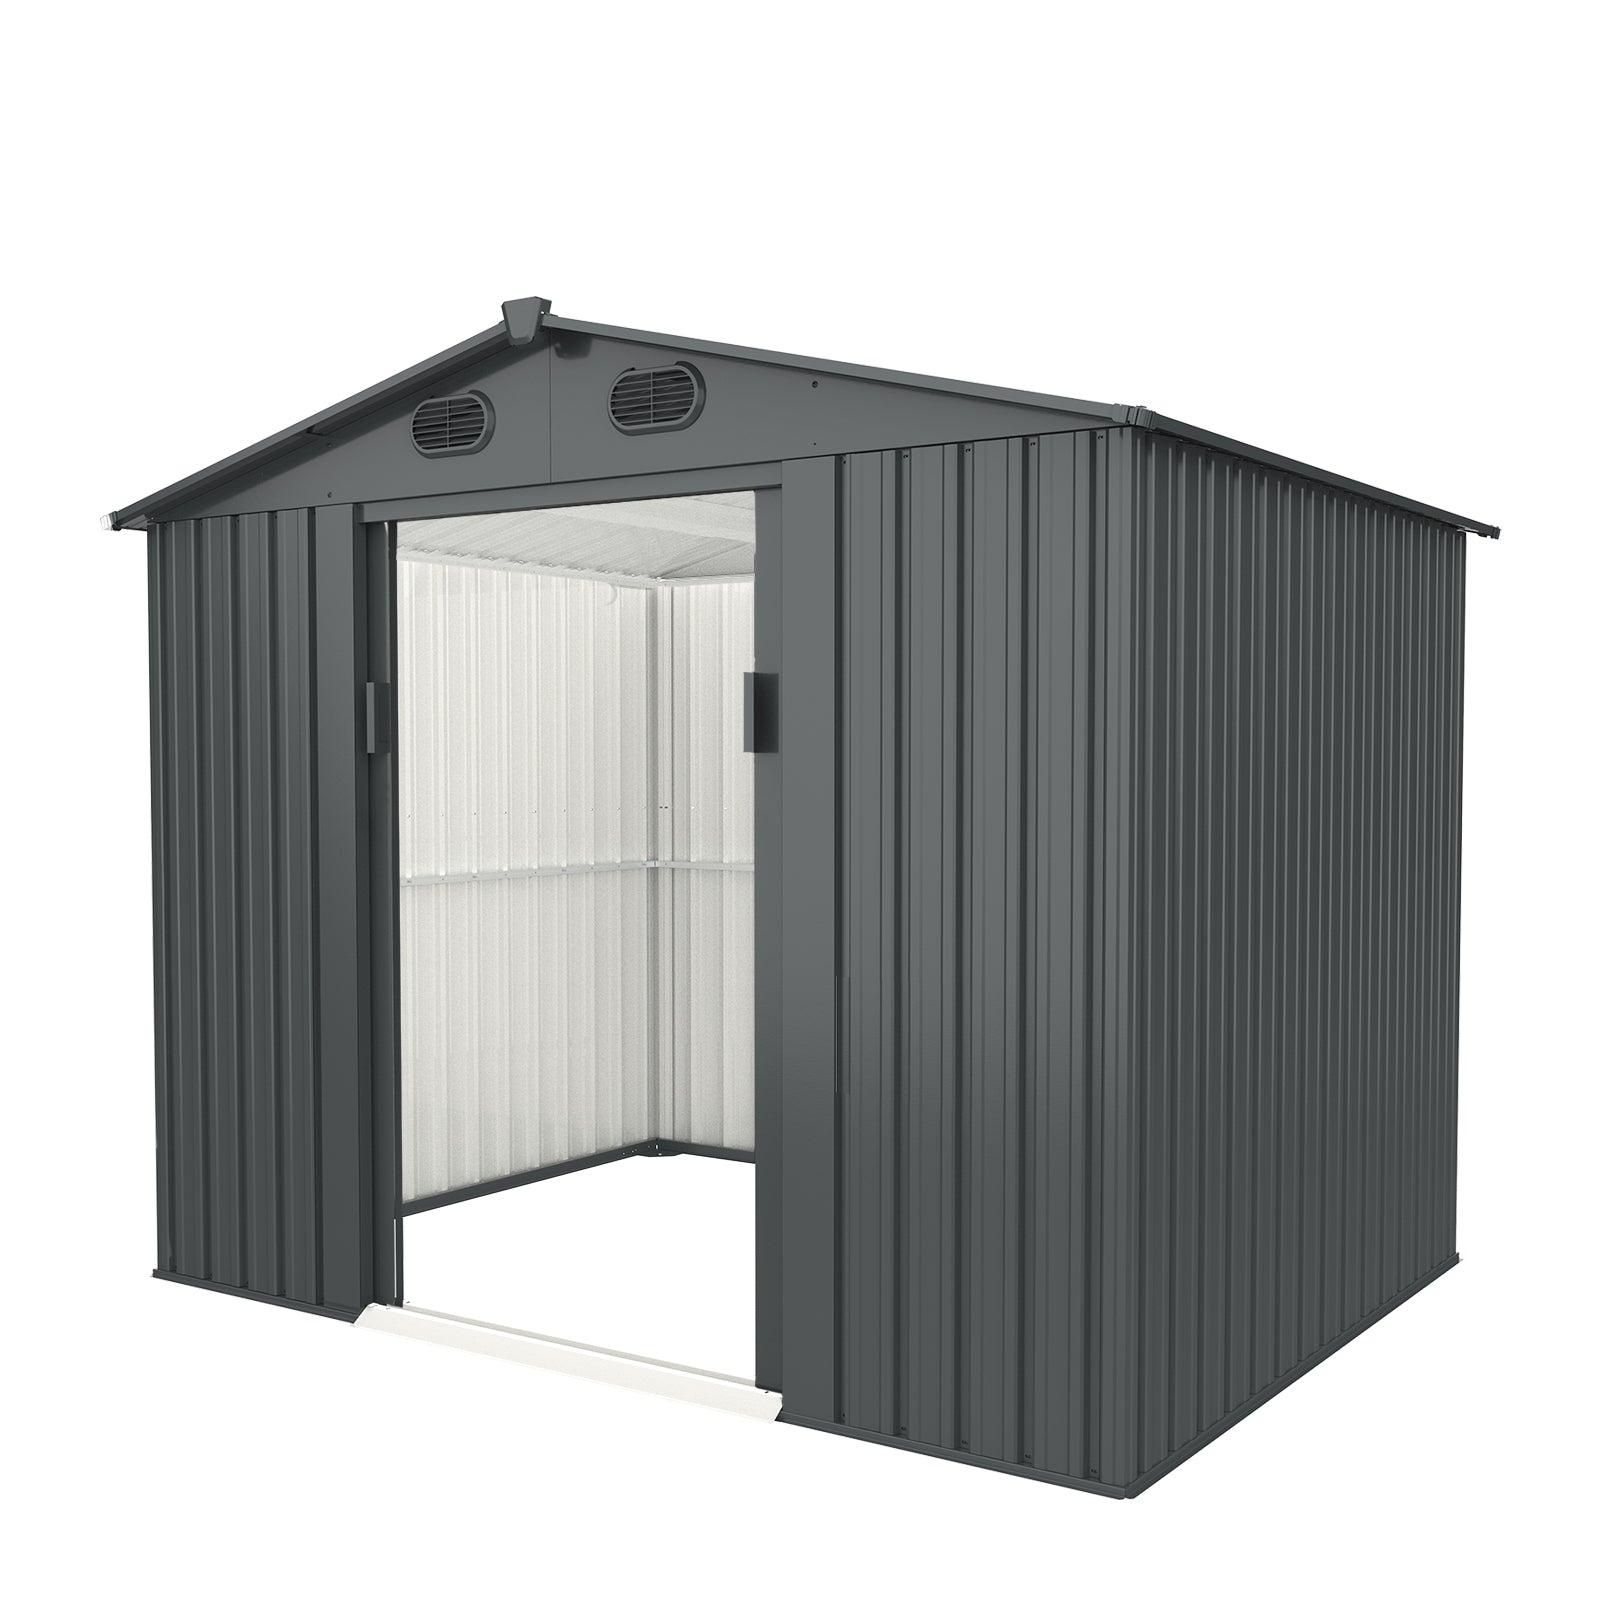 NatureVault, 8' X 6' Galvanized Steel Garden Shed with 4 Vents & Lockable Double Sliding Door, Utility Tool Shed Storage House for Backyard